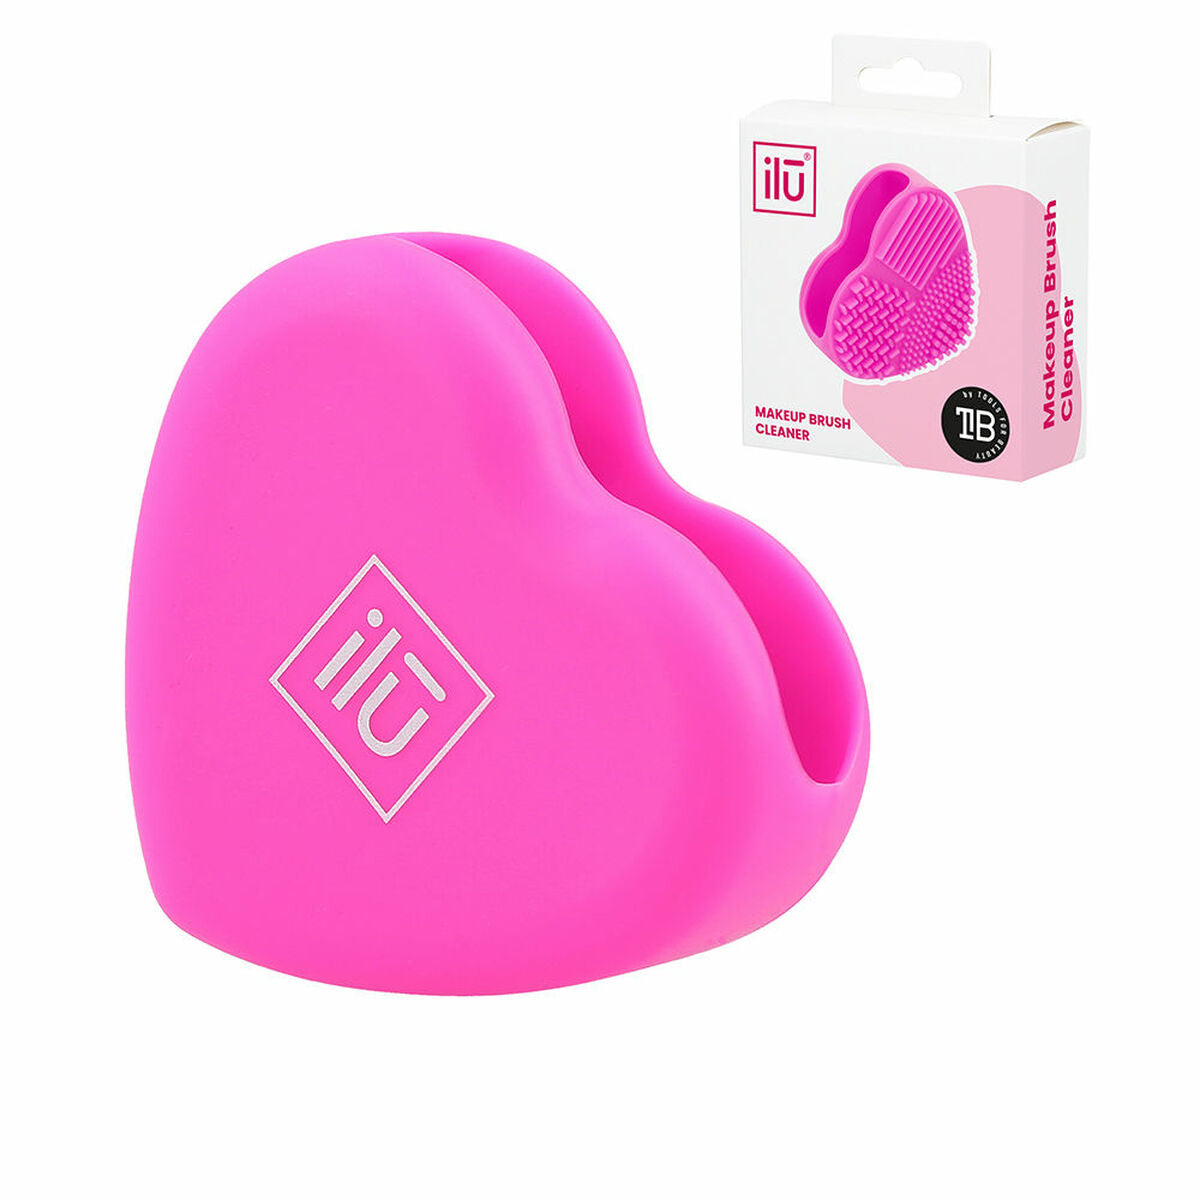 Make-up Brush Cleaner Ilū Brush Cleaner Heart Silicone (1 Unit)-0